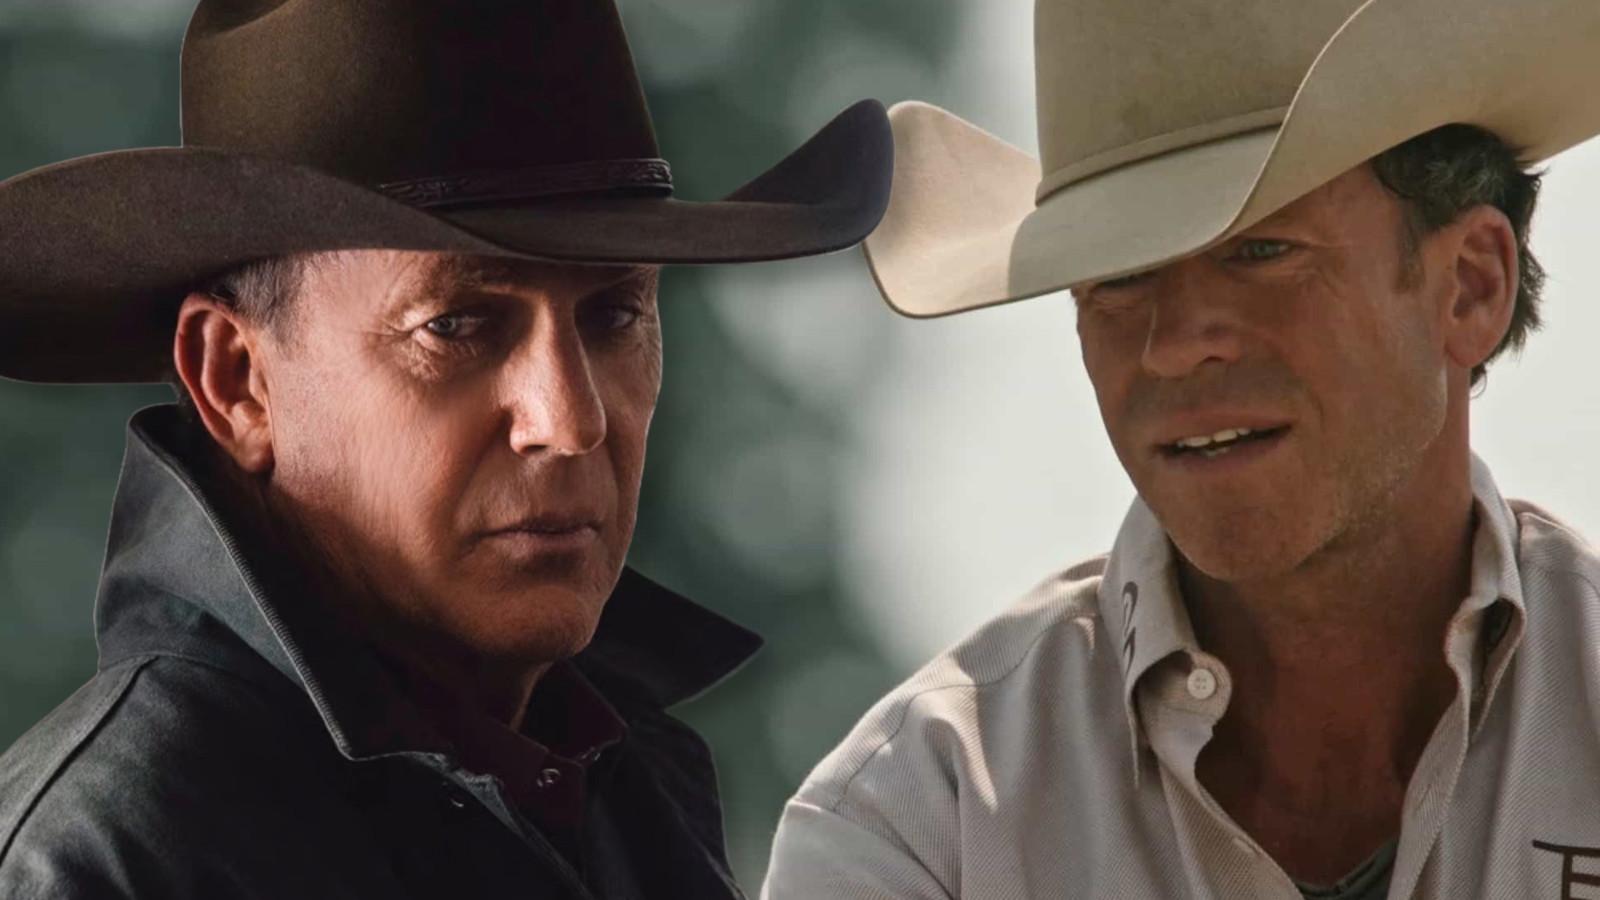 Kevin Costner’s feud with Taylor Sheridan explained: Kevin Costner and Taylor Sheridan